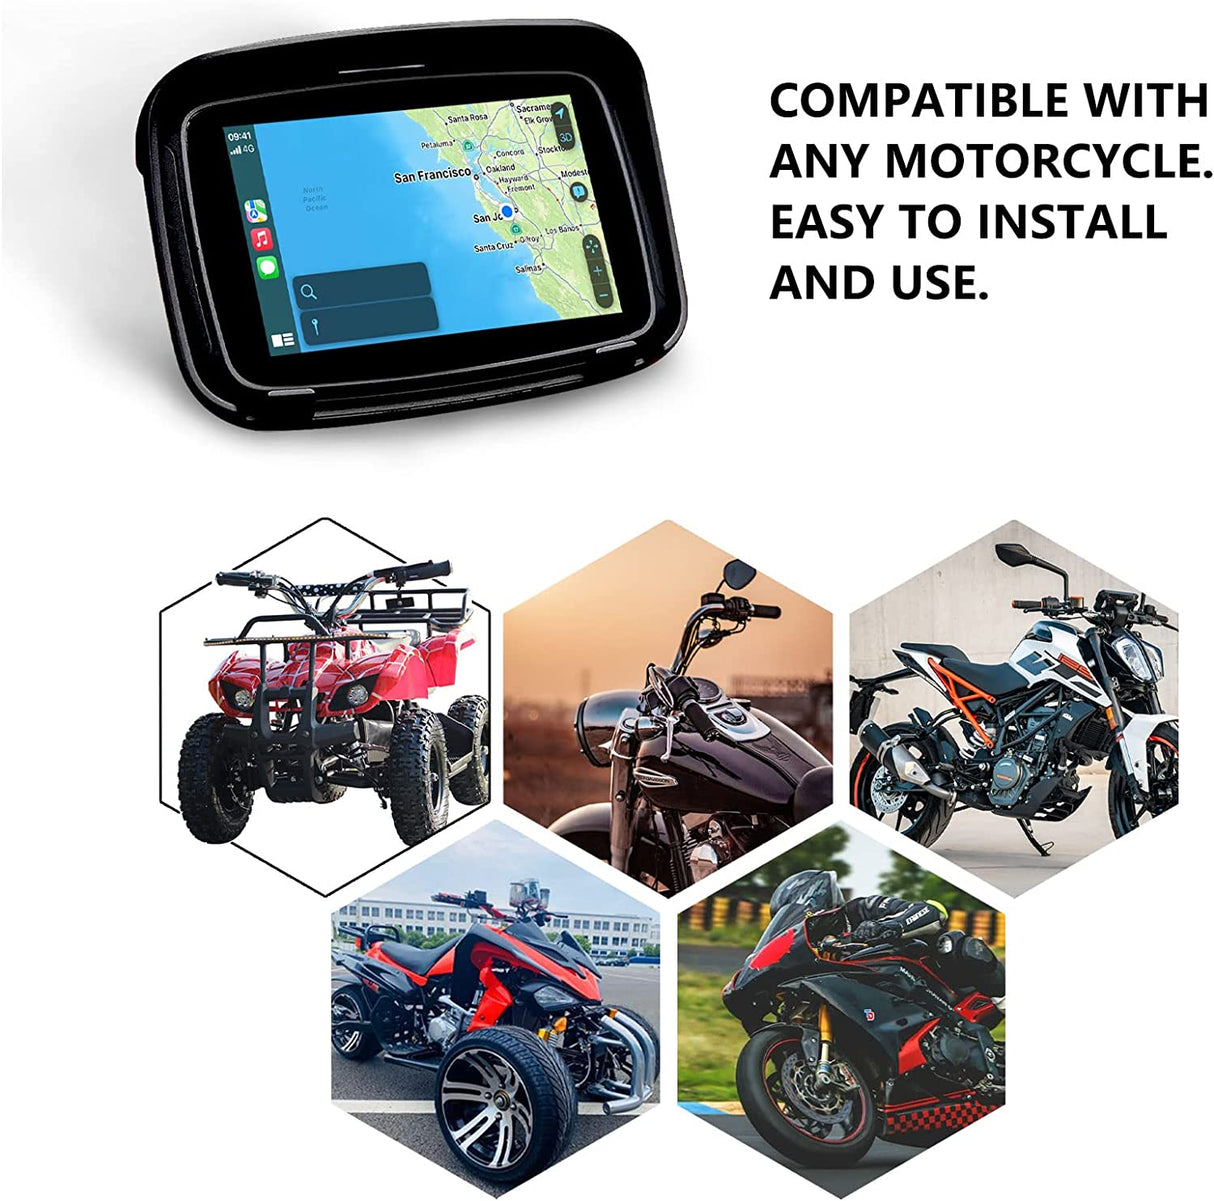  Portable Wireless Carplay & Android Auto for Motorcycle  Navigator 5 IPS Touch Screen Waterproof Car Monitor for Motor Bike,  Built-in Speaker Voice Control Dual Bluetooth Work with Headset 12-24V :  Automotive